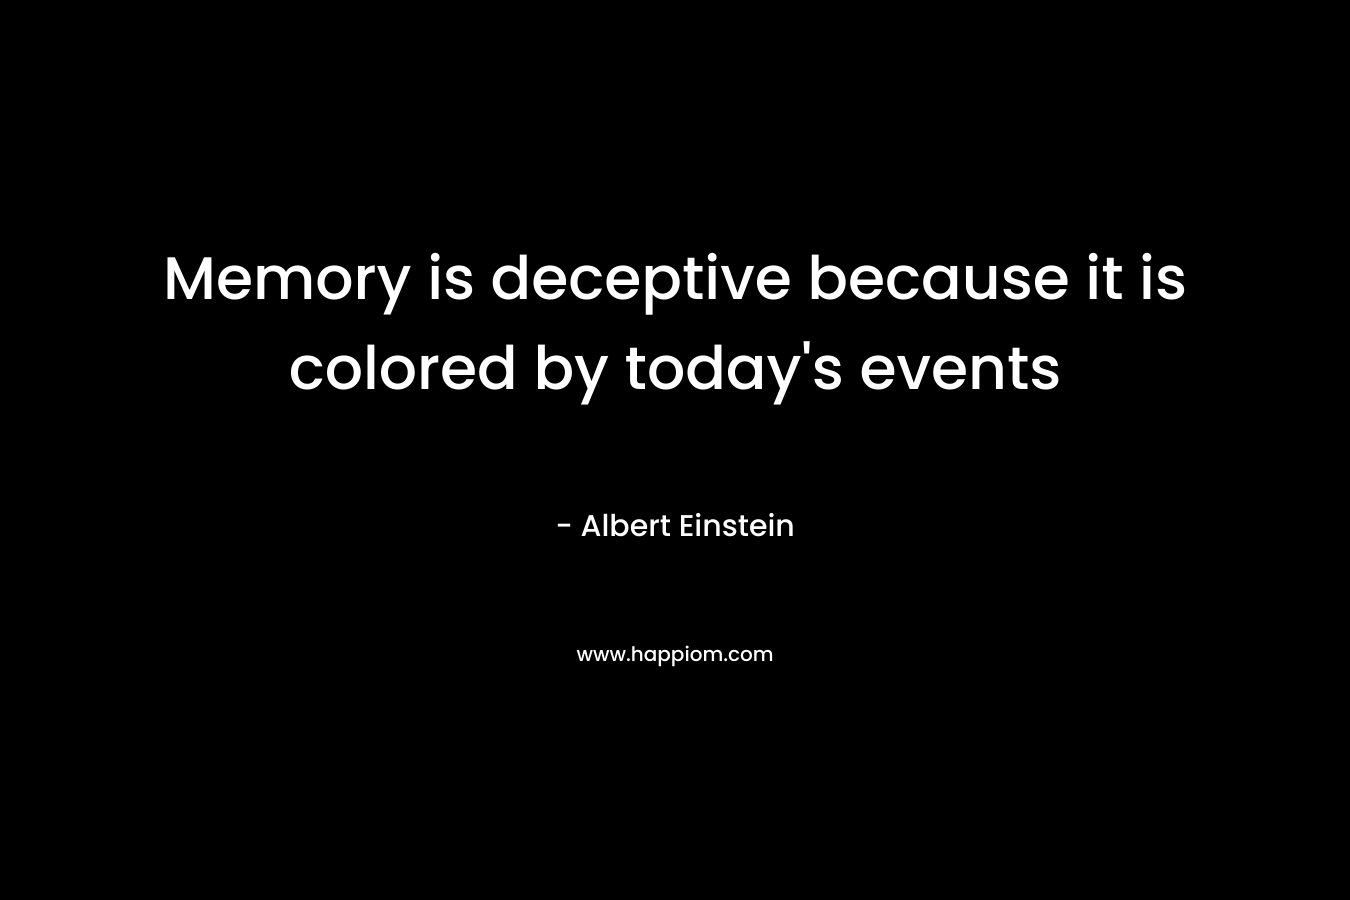 Memory is deceptive because it is colored by today's events